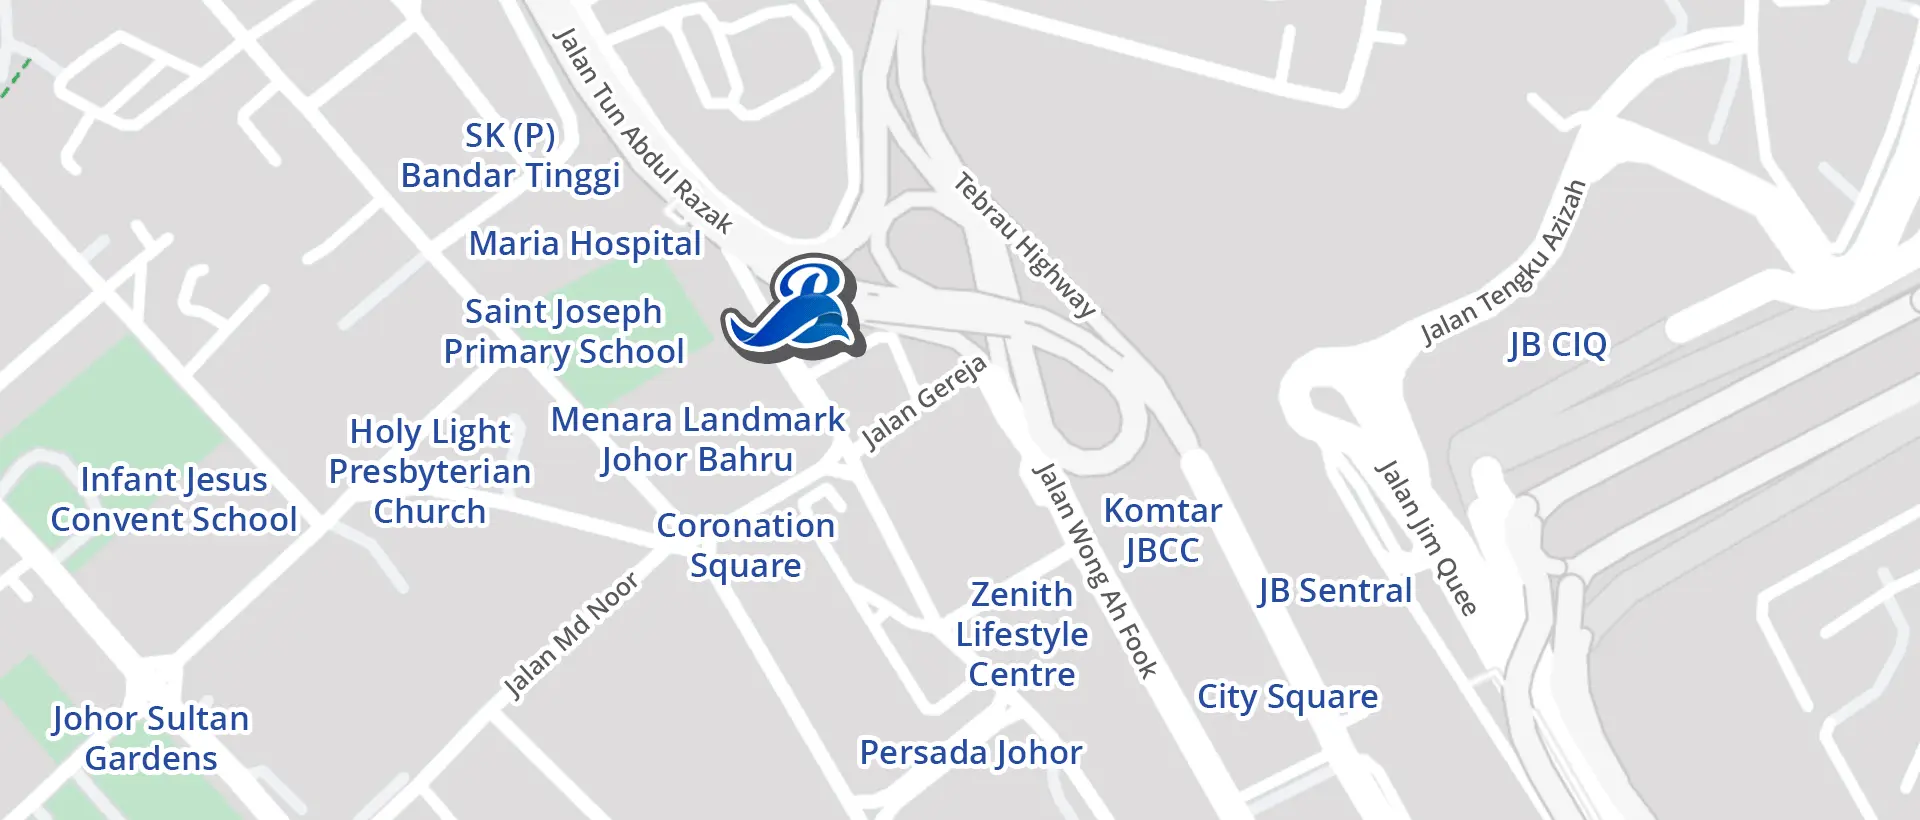 View Bluewaters Staycate Google Maps to get direction to Luxurious Staycation Homestay in Johor Bahru Malaysia